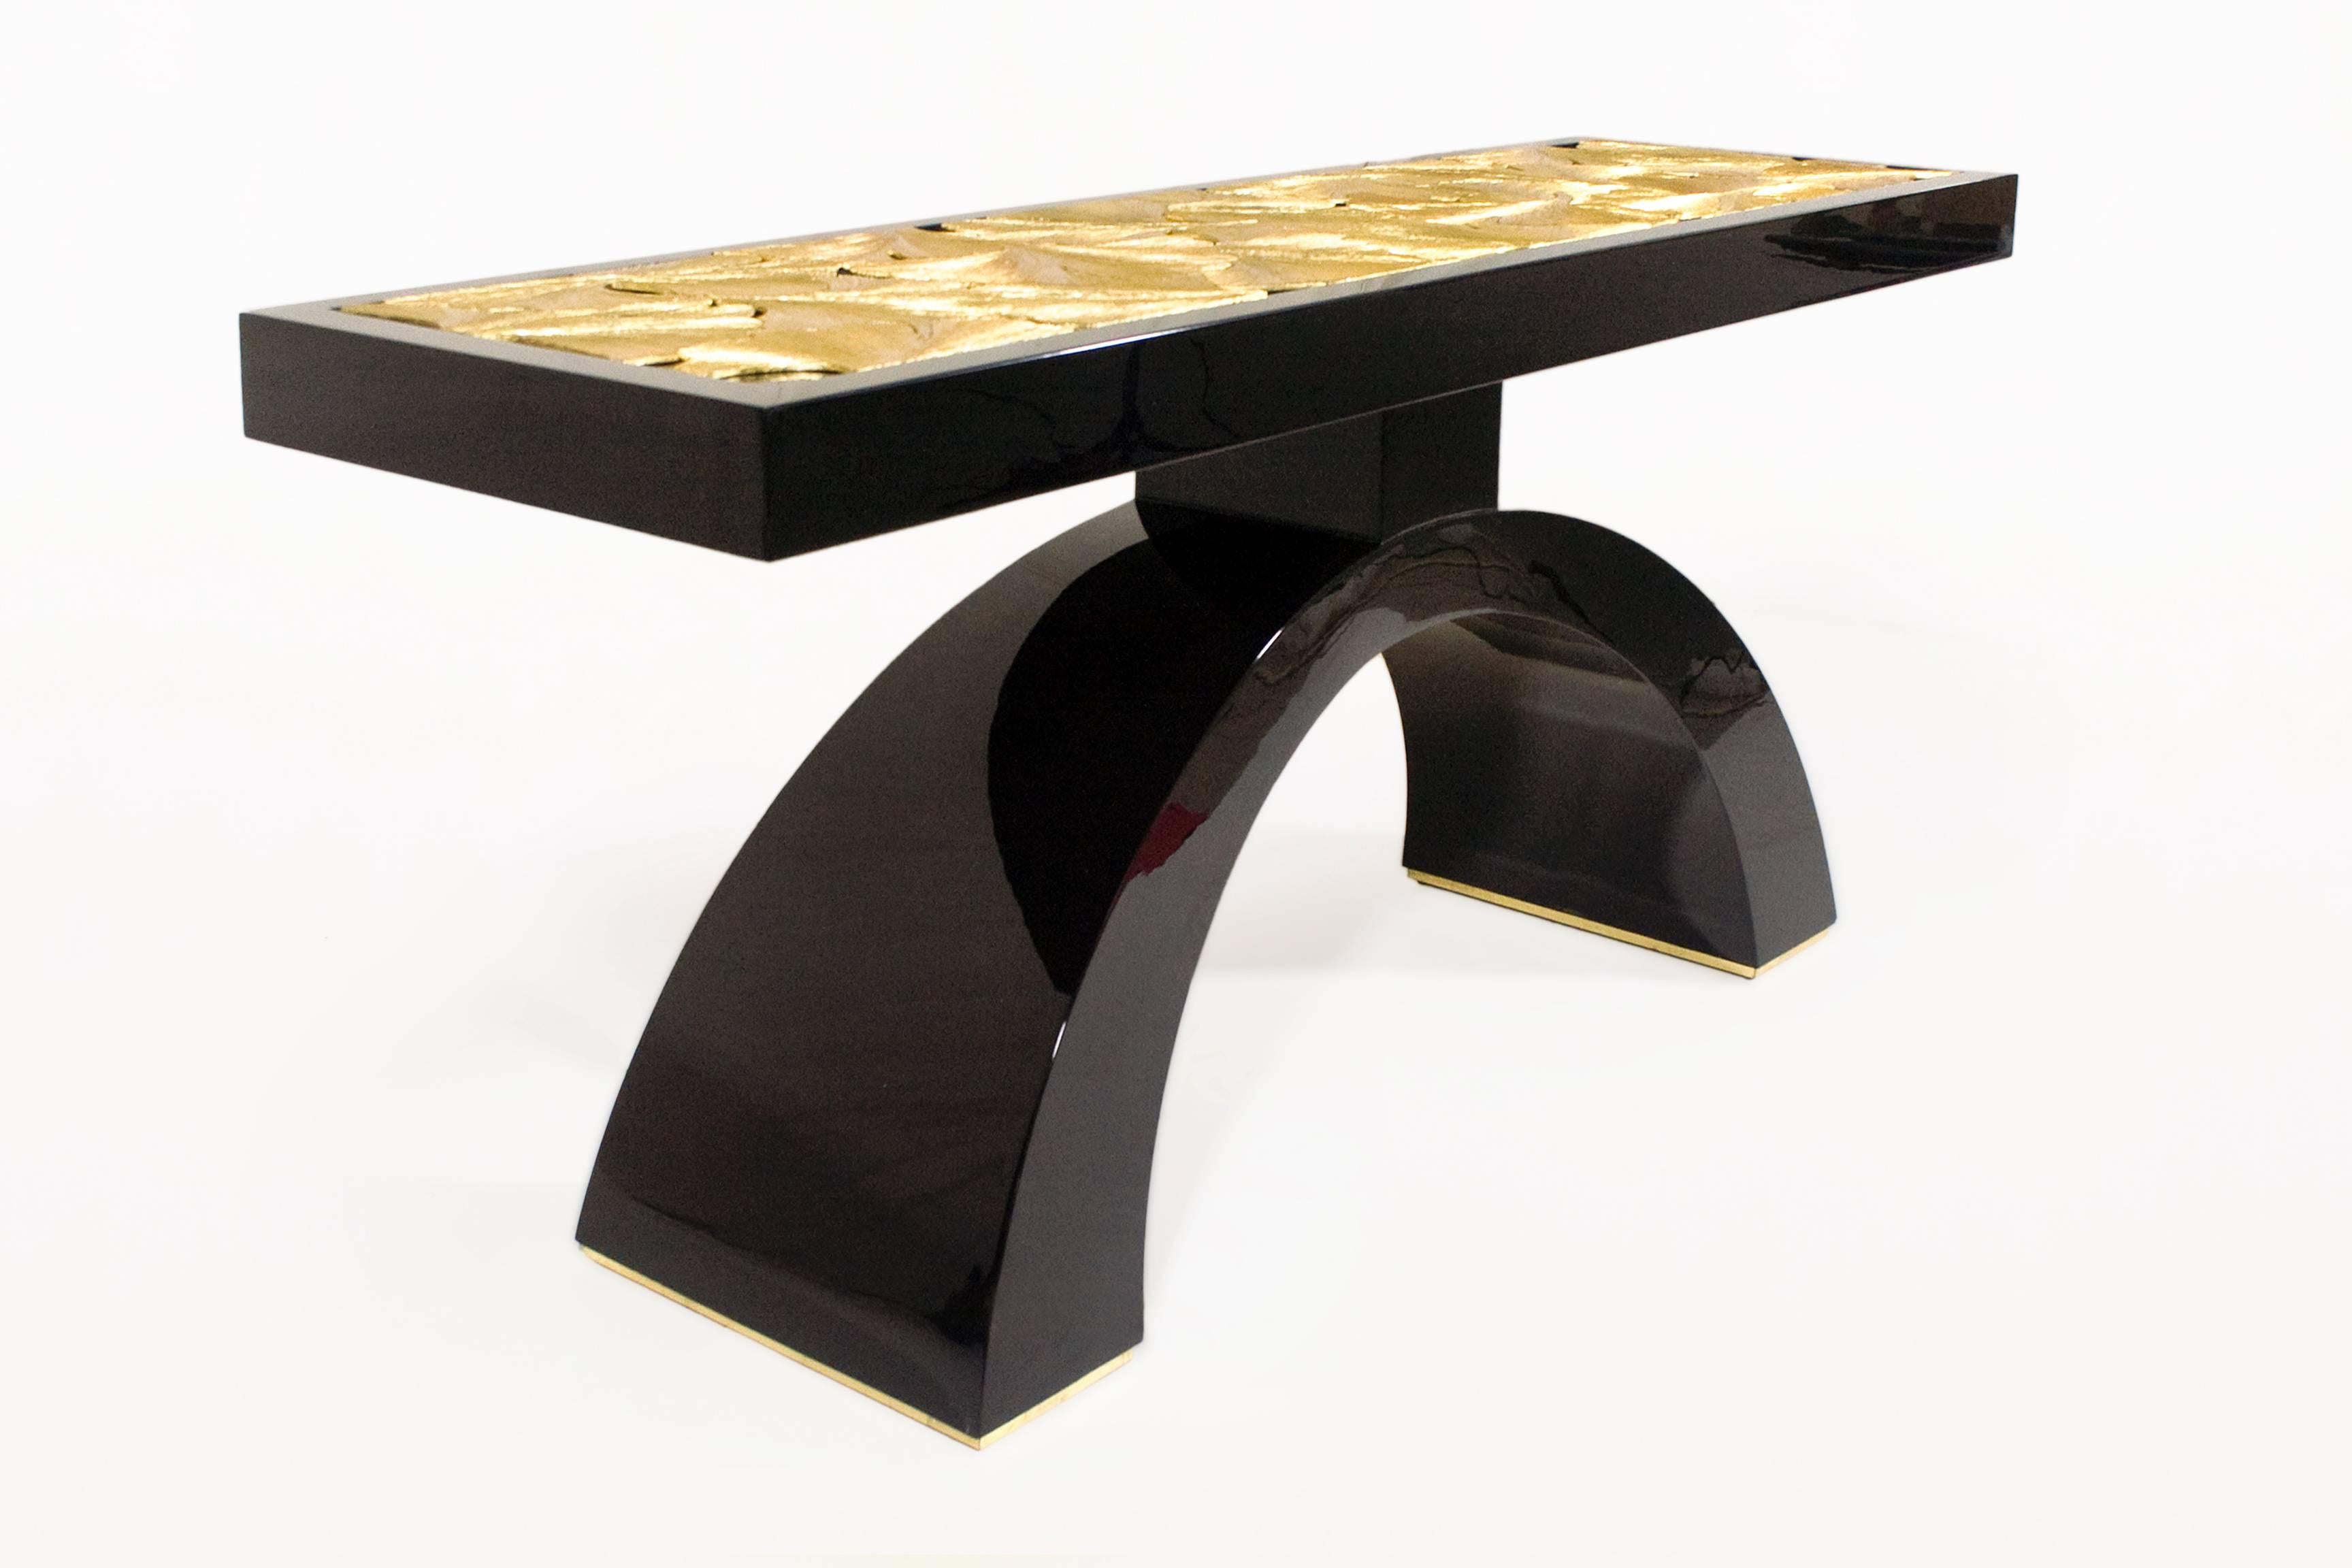 Wood black lacquered console with iron leaves chiseled, engraved and gold leaf finishing. Manufactured and designed by JR Roca.
Series number 02/100.